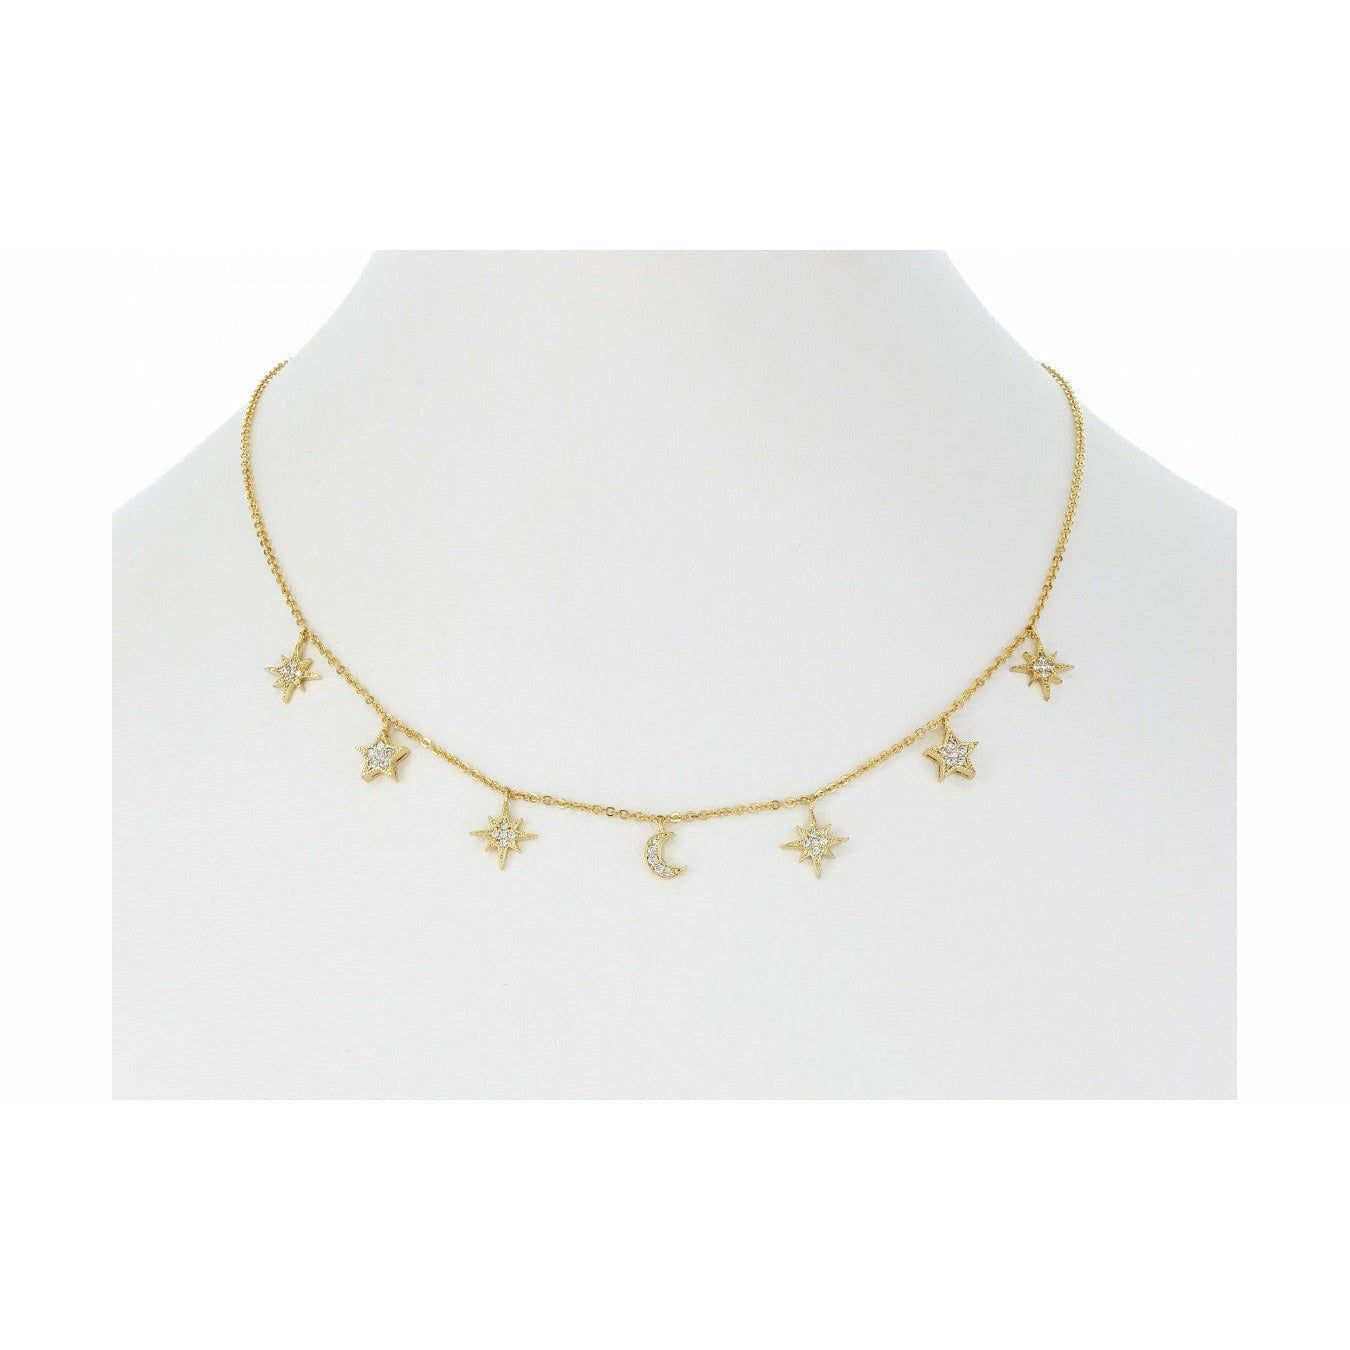 Starbursts, Stars and Moon Necklace in Gold Tone